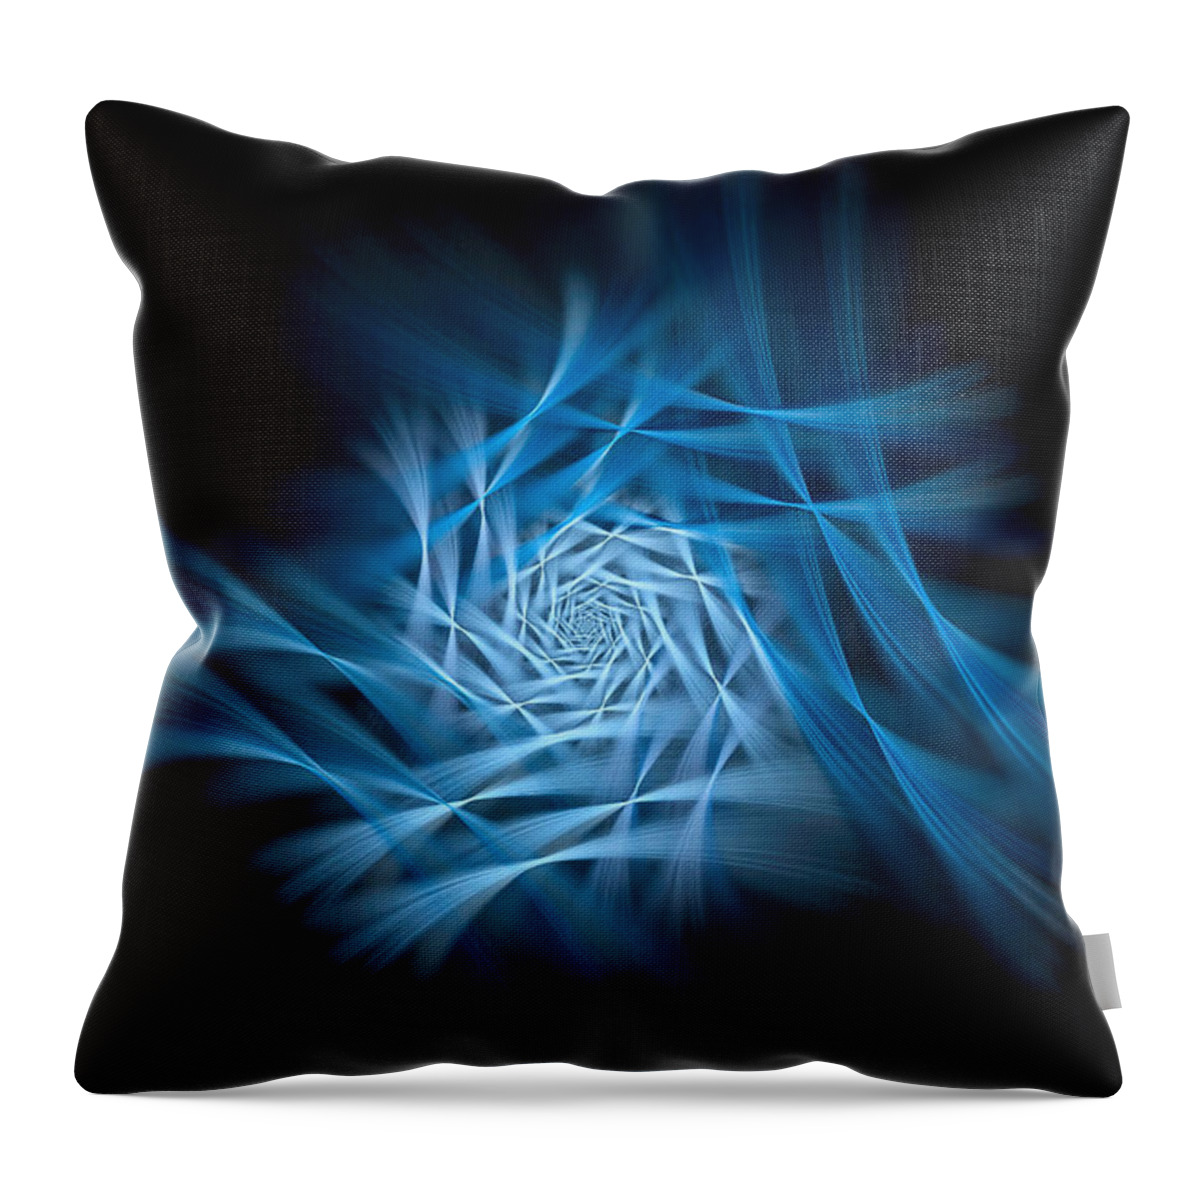 Flower. Flora. Floral Throw Pillow featuring the digital art Flowerama Blue by Don Northup